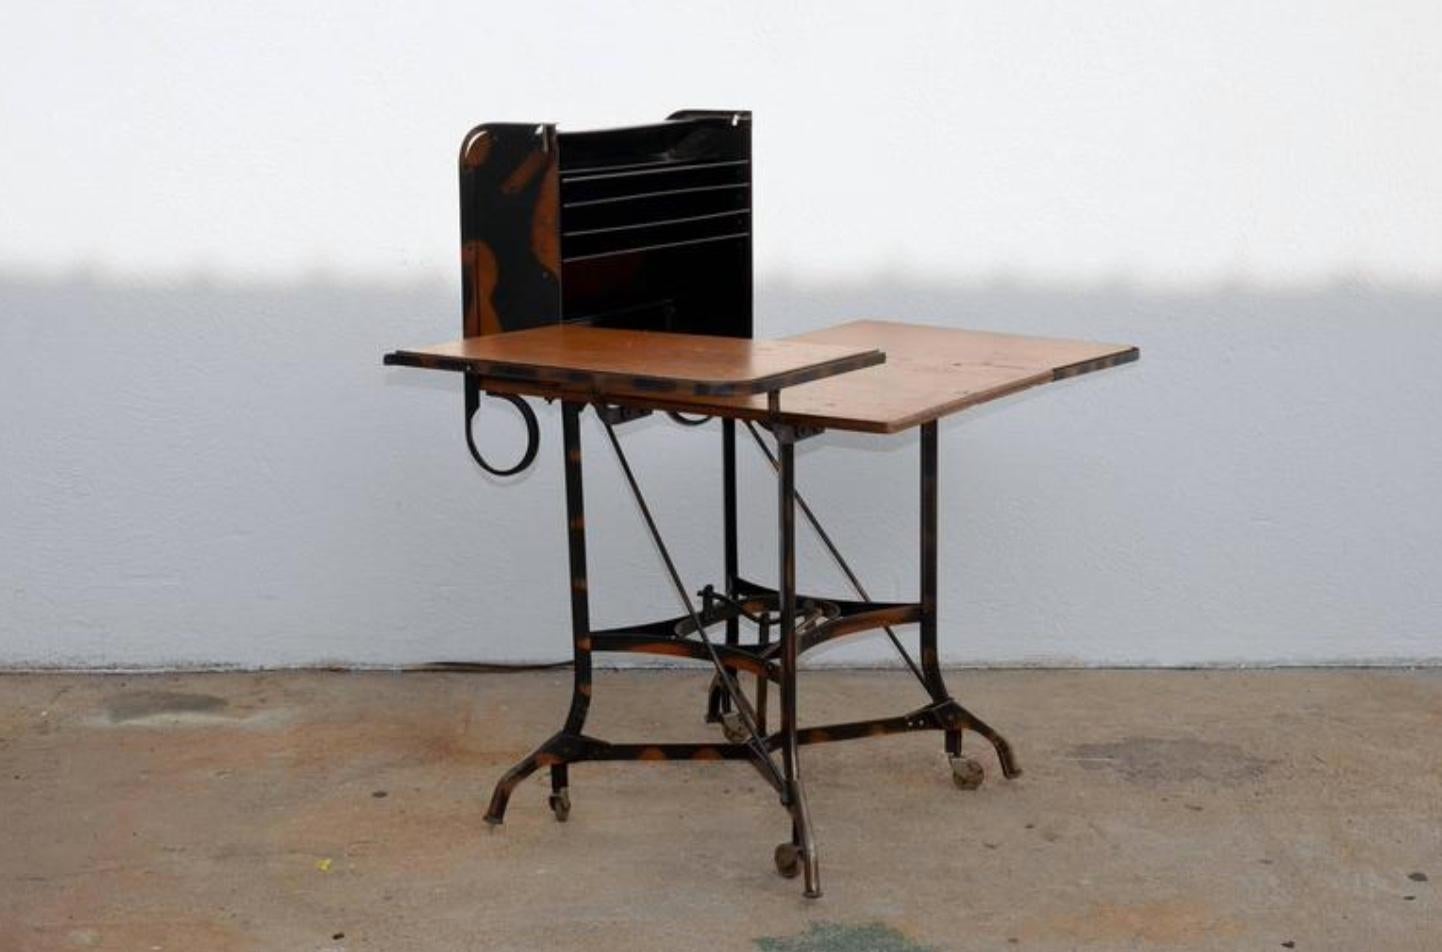 Early Industrial rolling desk by Toledo. Great for a laptop desk. A lever picks up the desk on wheels for easy moving and secures it back in place.